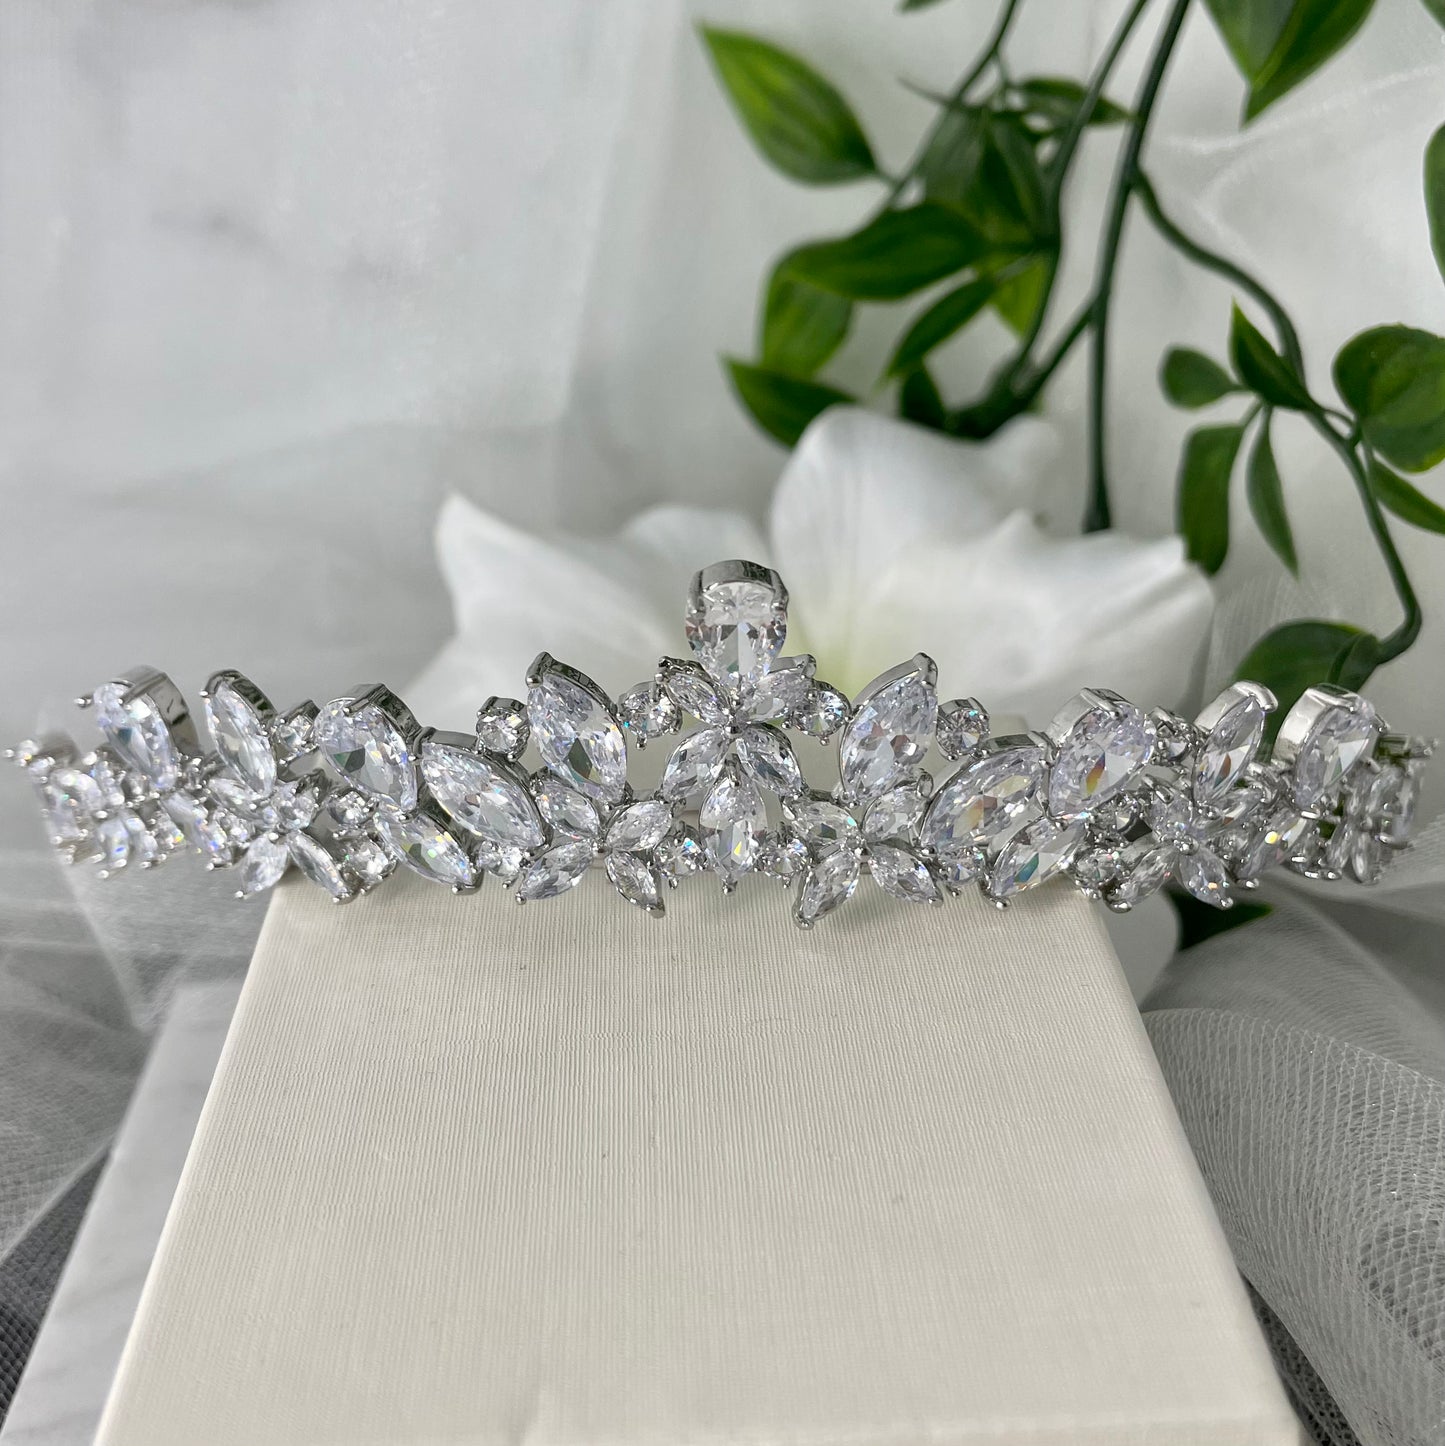 Patricia Bridal Tiara showcasing a floral and teardrop leaf design with sparkling crystals, perfect for adding luxury and elegance to any bridal look.